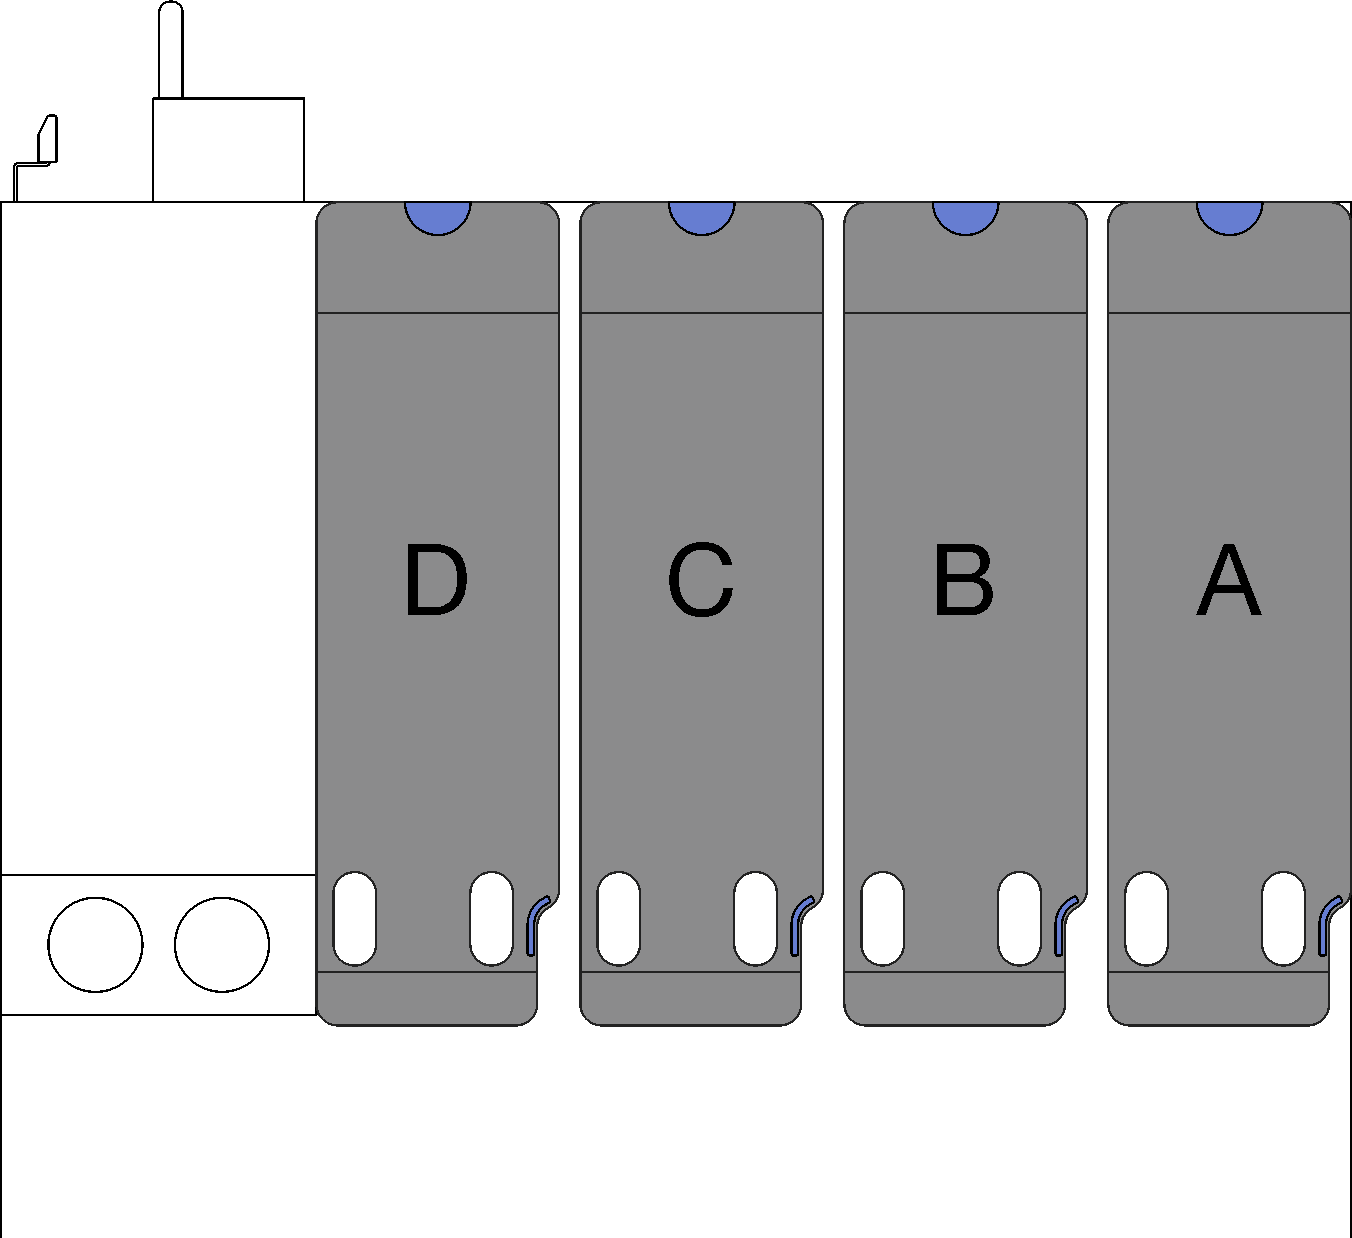 PCIe riser type and location for the server model with four PCIe risers